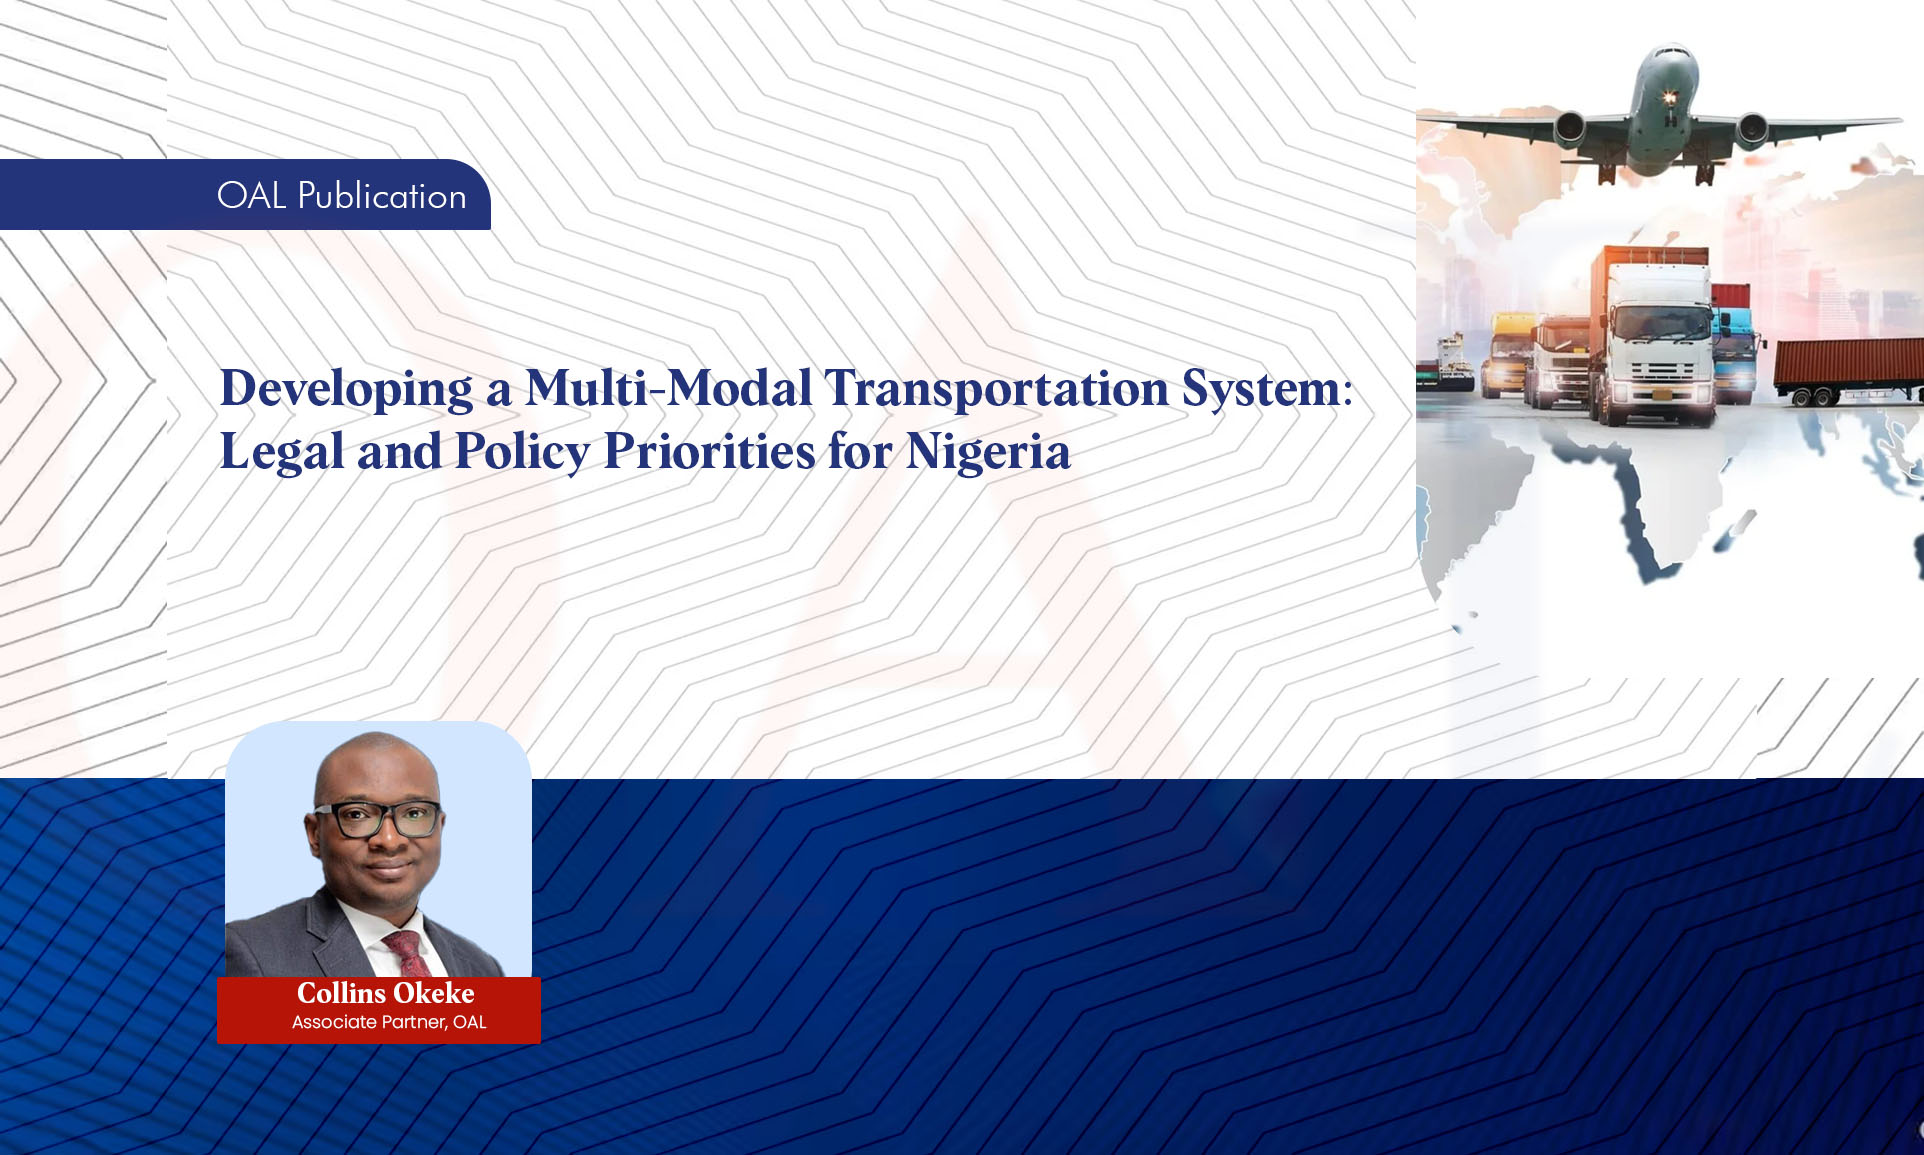 Developing a Multi-Modal Transportation System: Legal and Policy Priorities for Nigeria